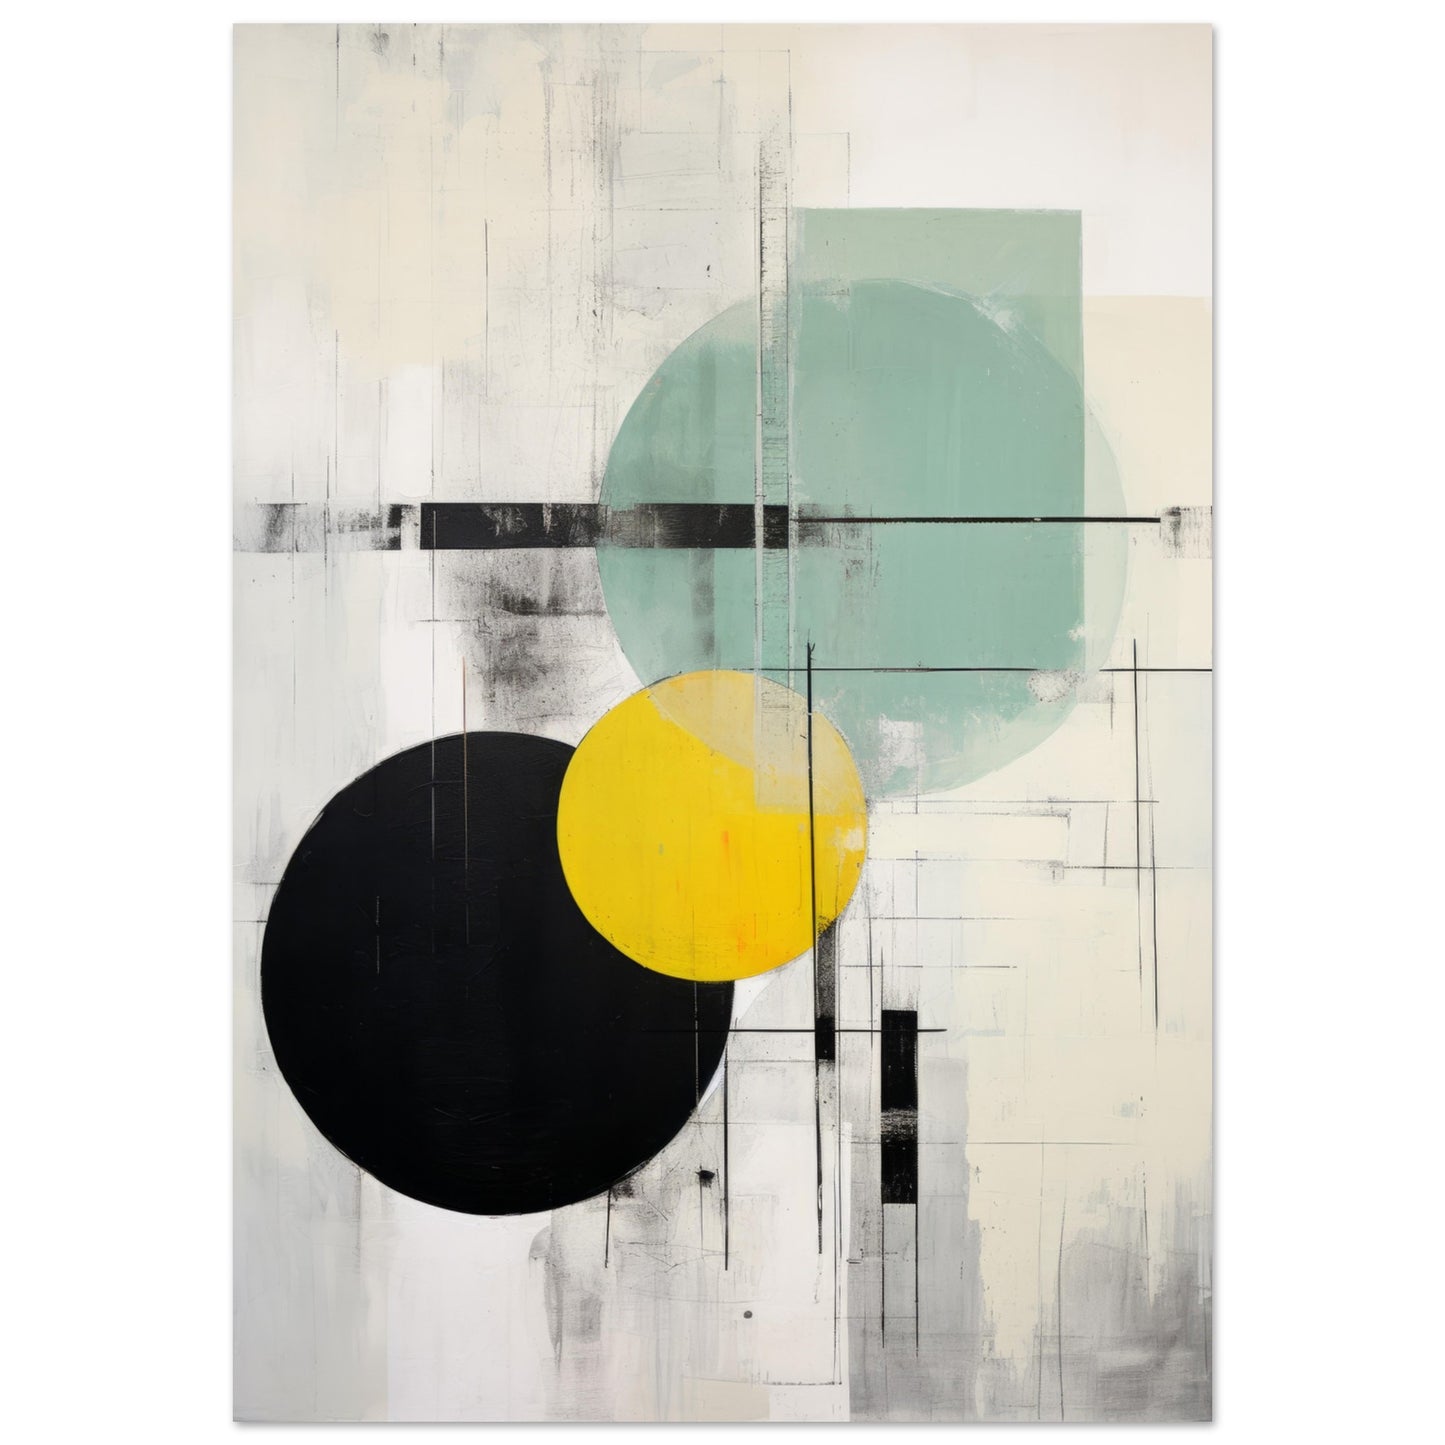 Modern abstract art titled "Trias" with geometric circles in green, yellow, and black, set against a mottled white and grey backdrop, adorned with linear elements. Framed and ready for contemporary wall decor.